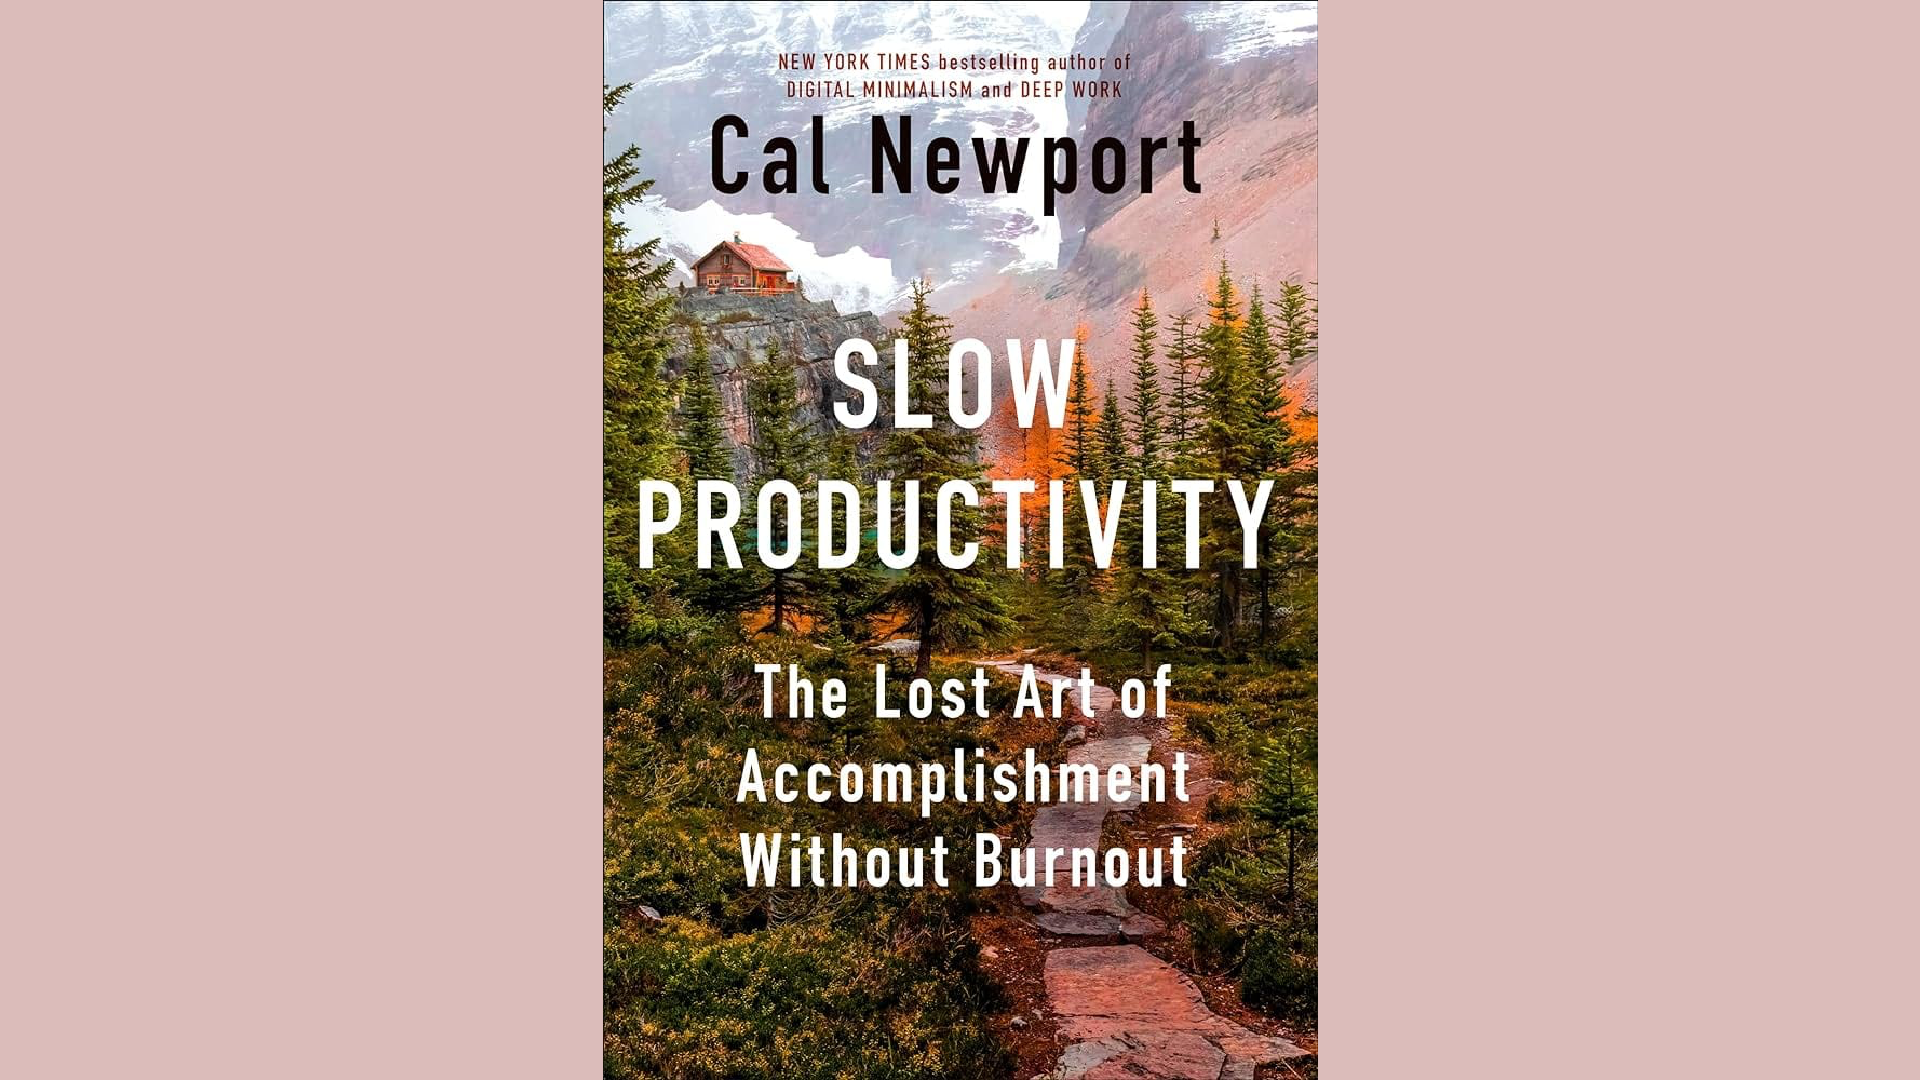 New Episode Alert: "Slow Productivity" by Cal Newport